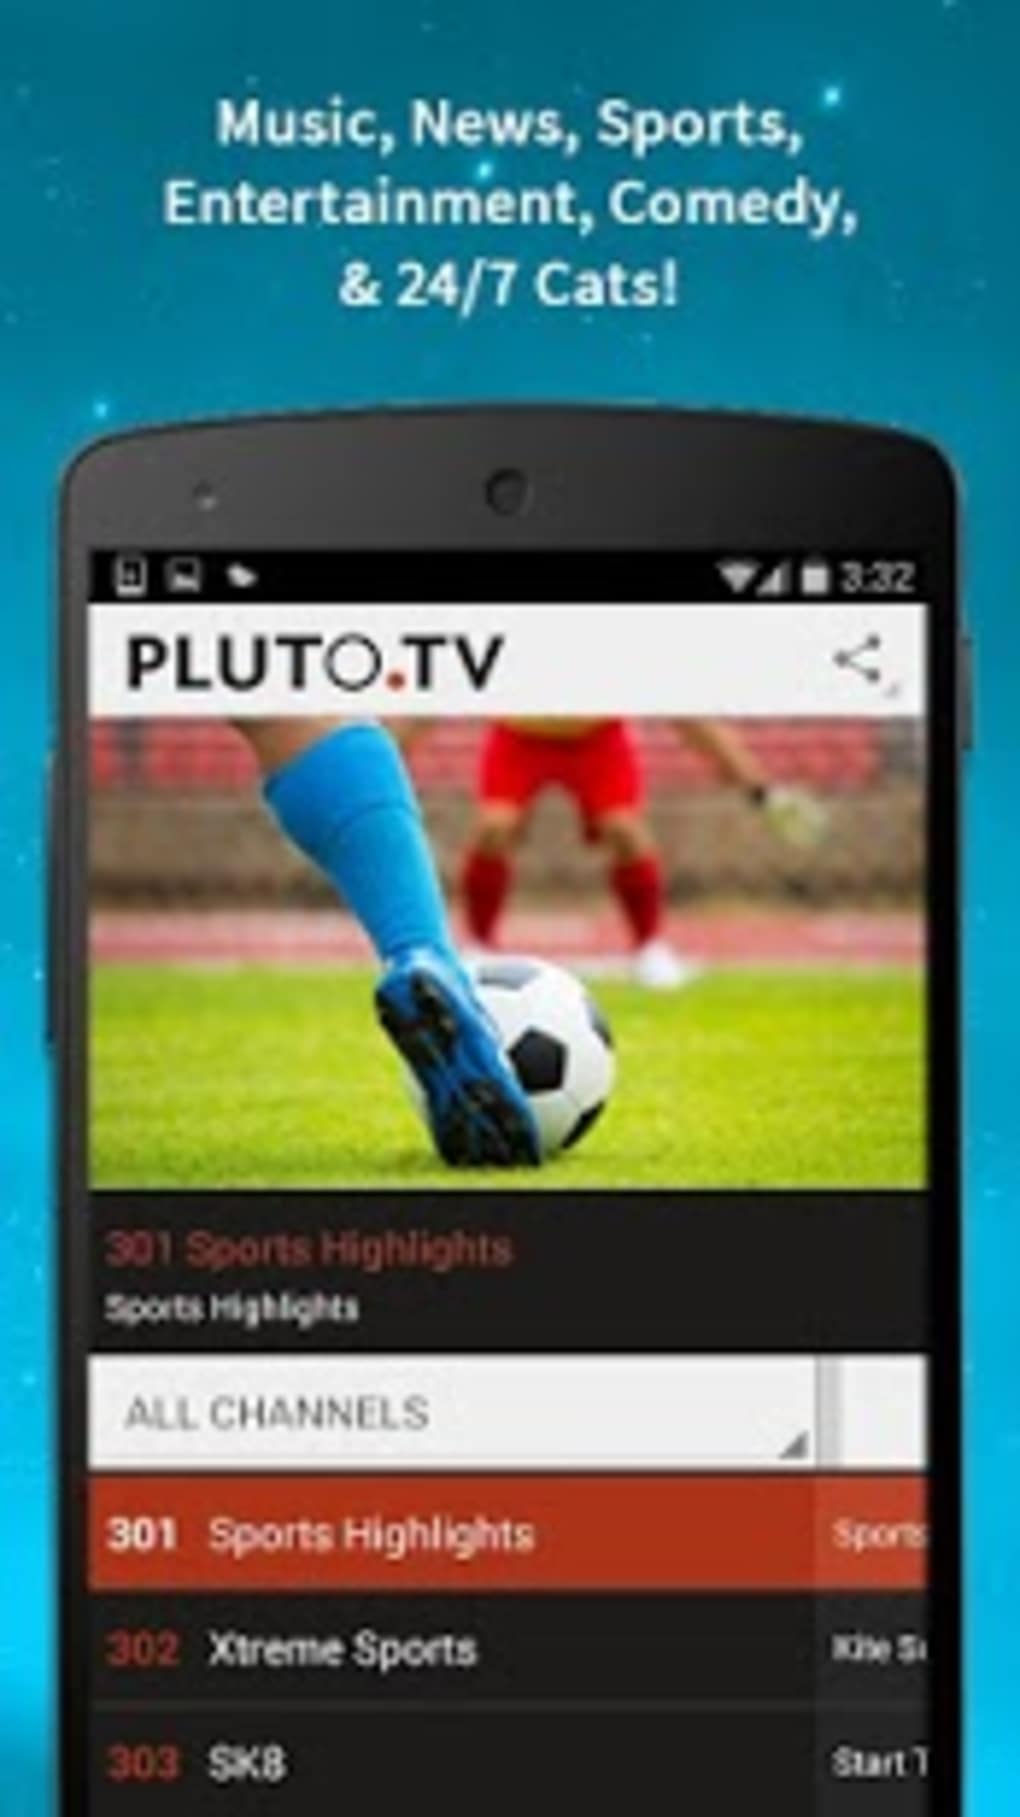 How Do I Download Pluto To My Smarttv - How To Add An App To An Lg Smart Tv Support Com | alai ...